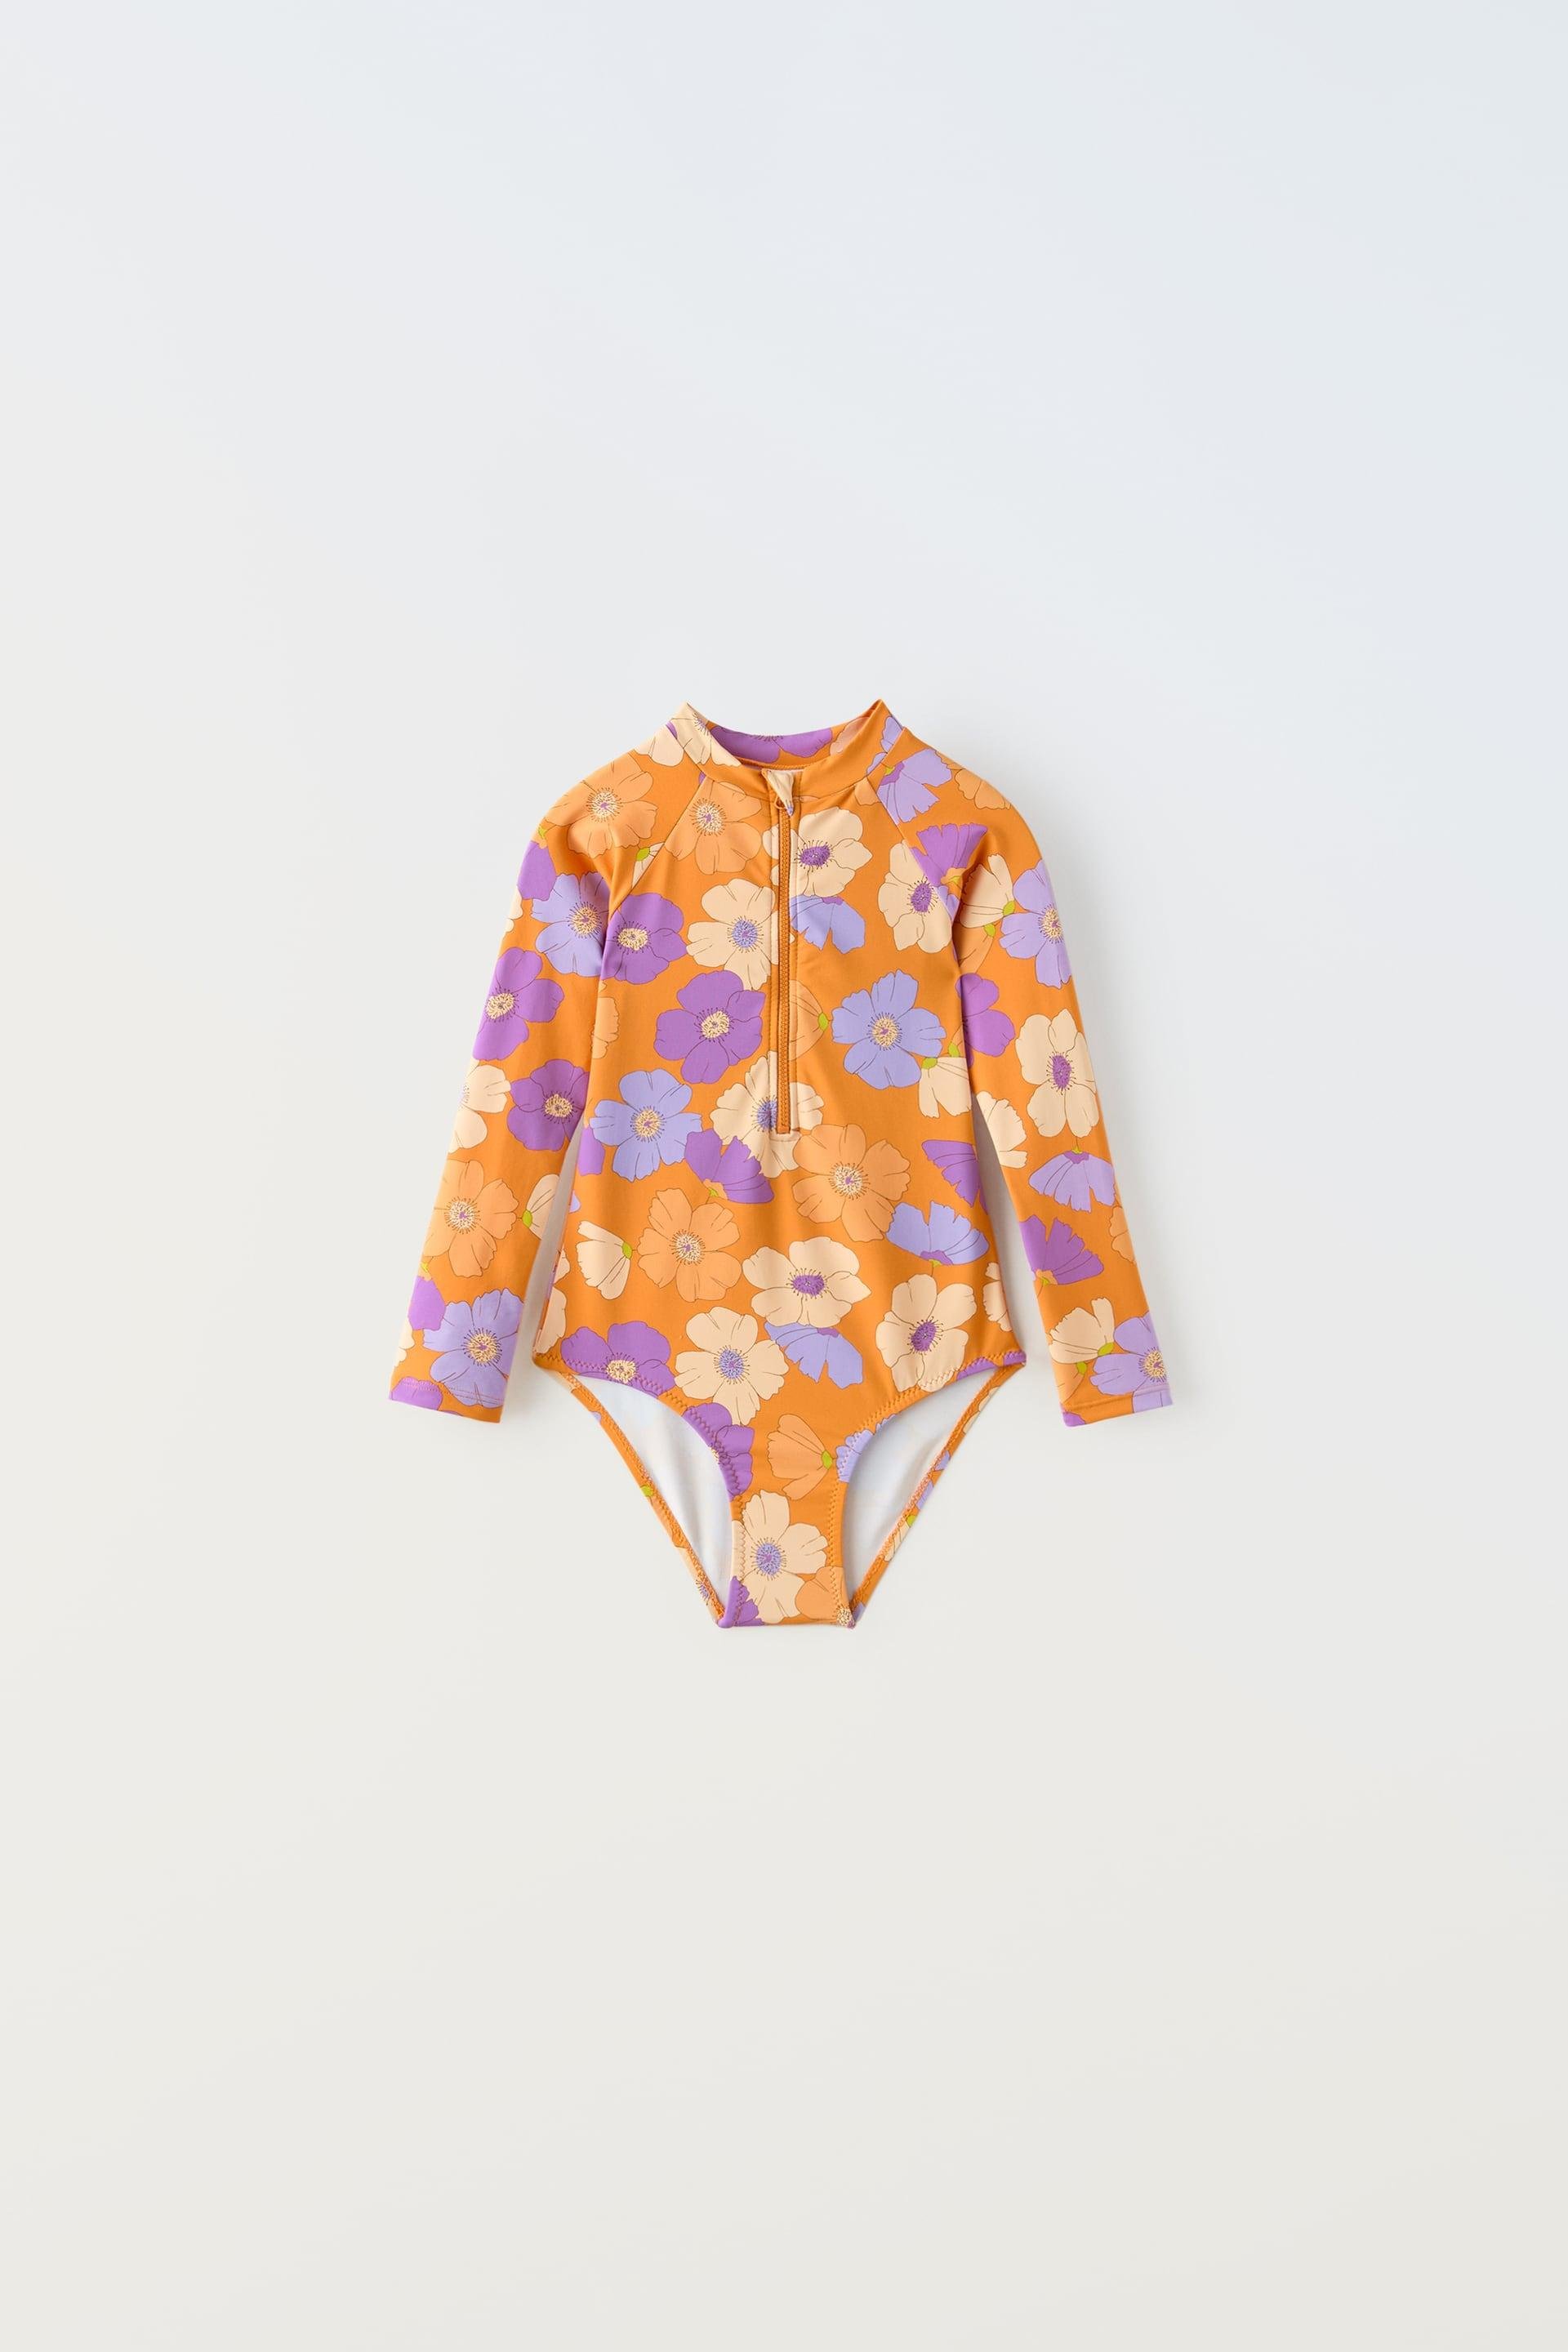 FLORAL SURF SWIMMING MAILLOT by ZARA